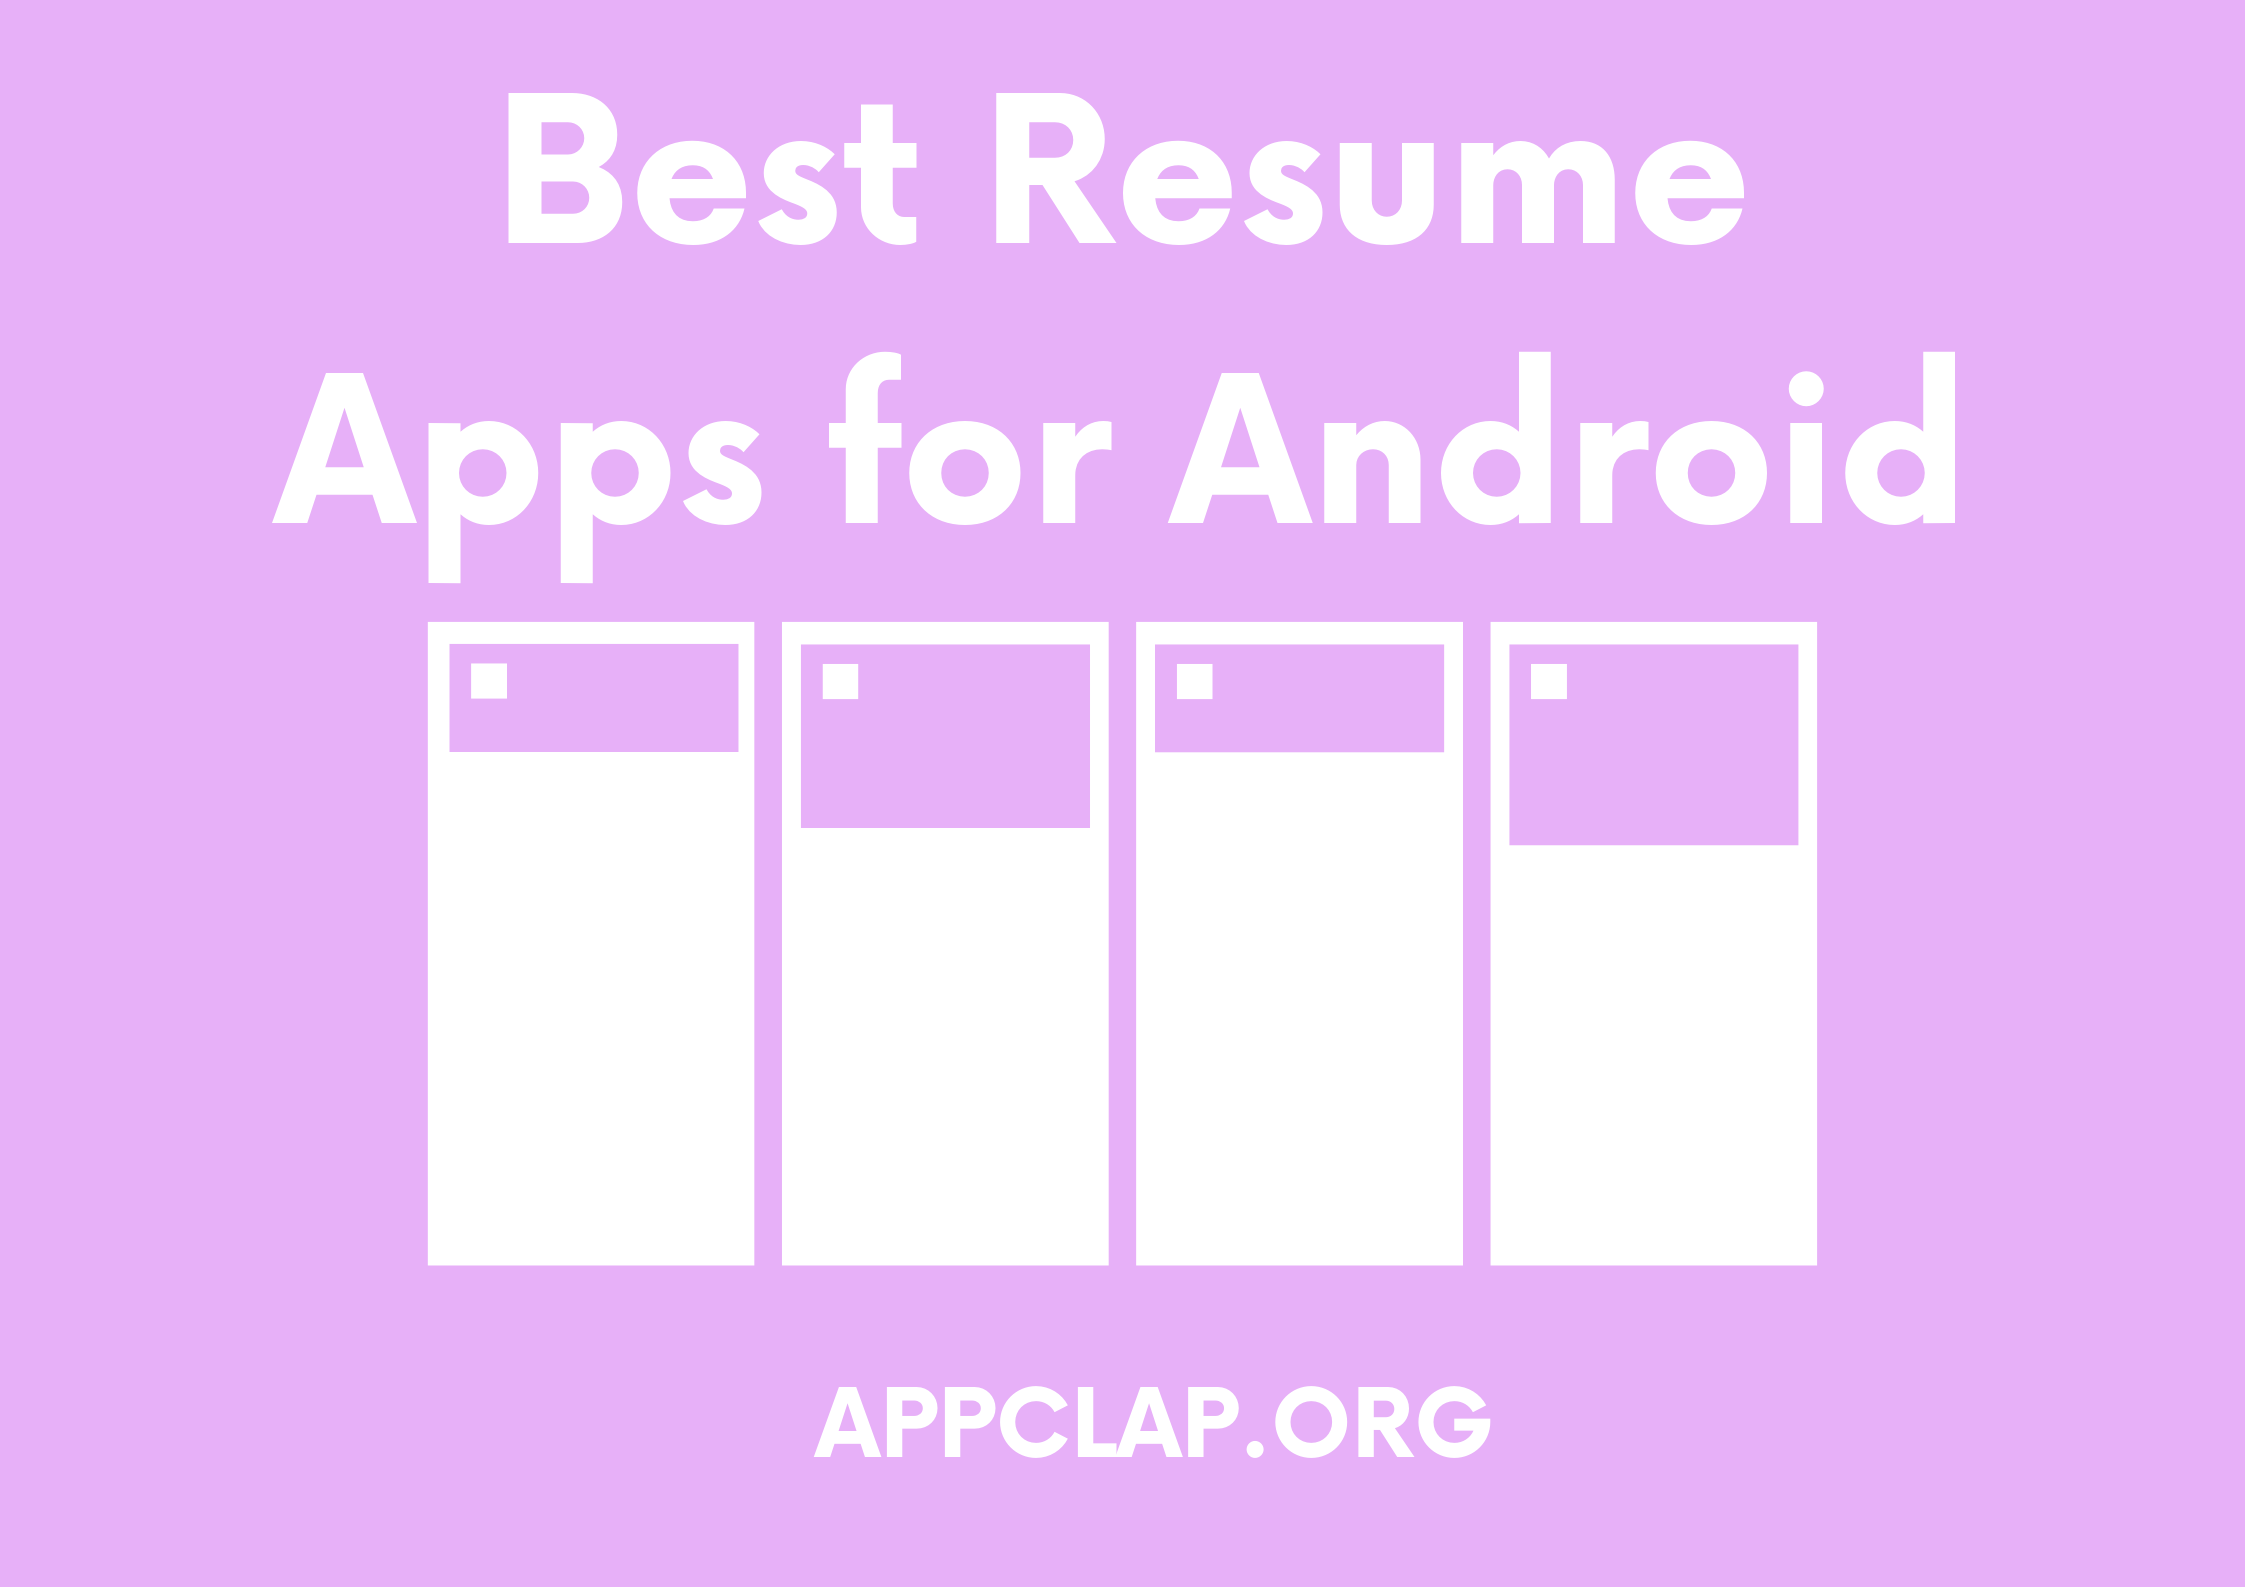 Best Resume Apps for Android